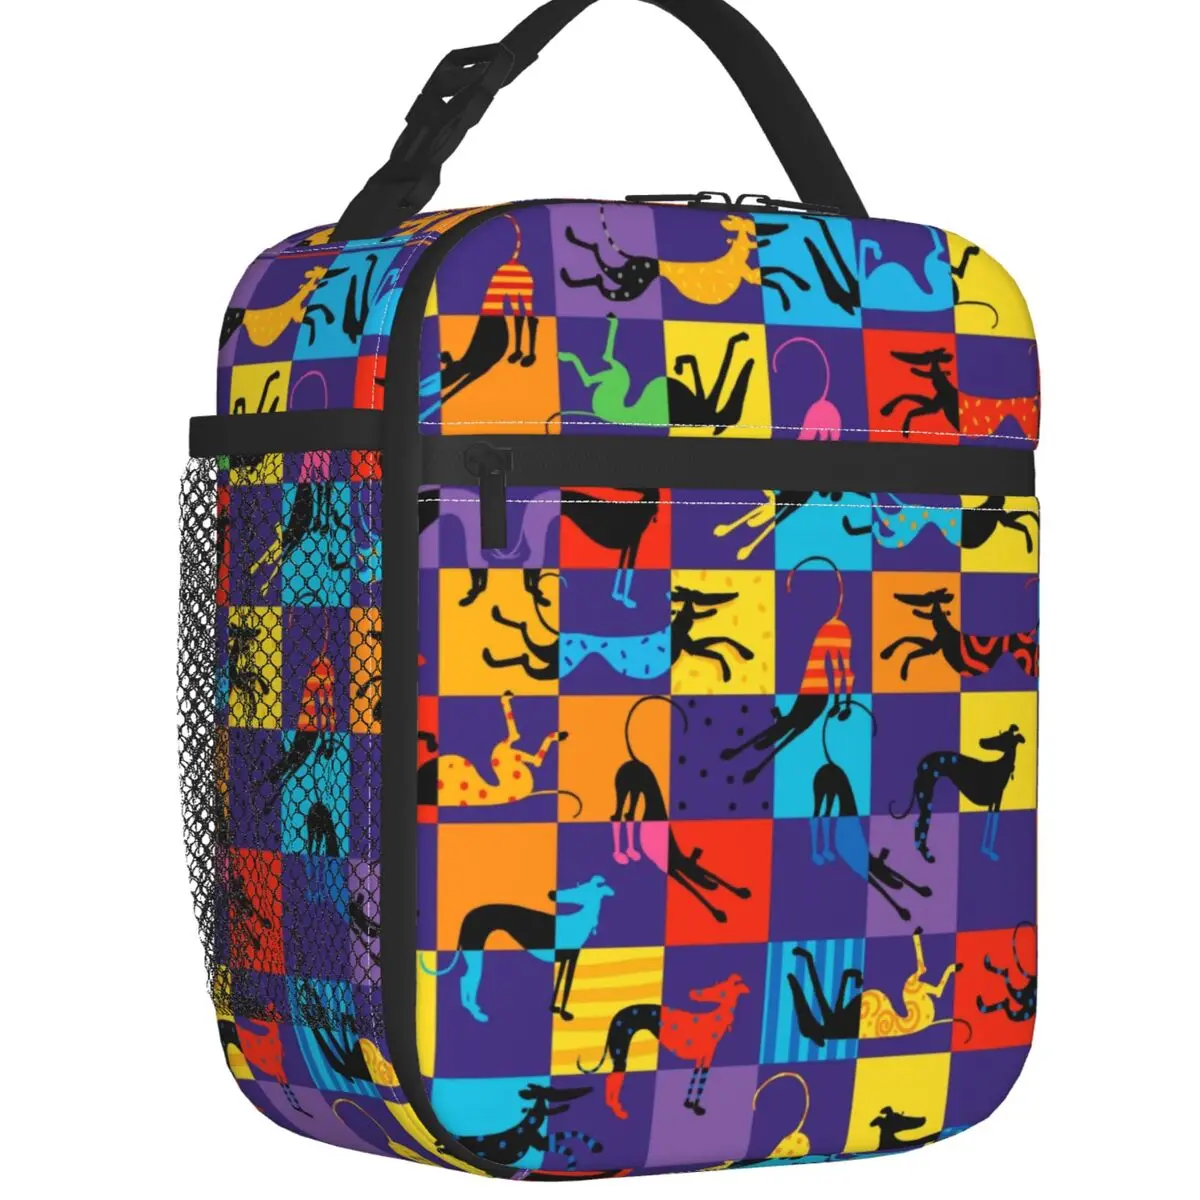 

Pop Art Hounds Lurcher Insulated Lunch Tote Bag Greyhound Whippet Sighthound Dog Portable Thermal Cooler Food Lunch Box Travel